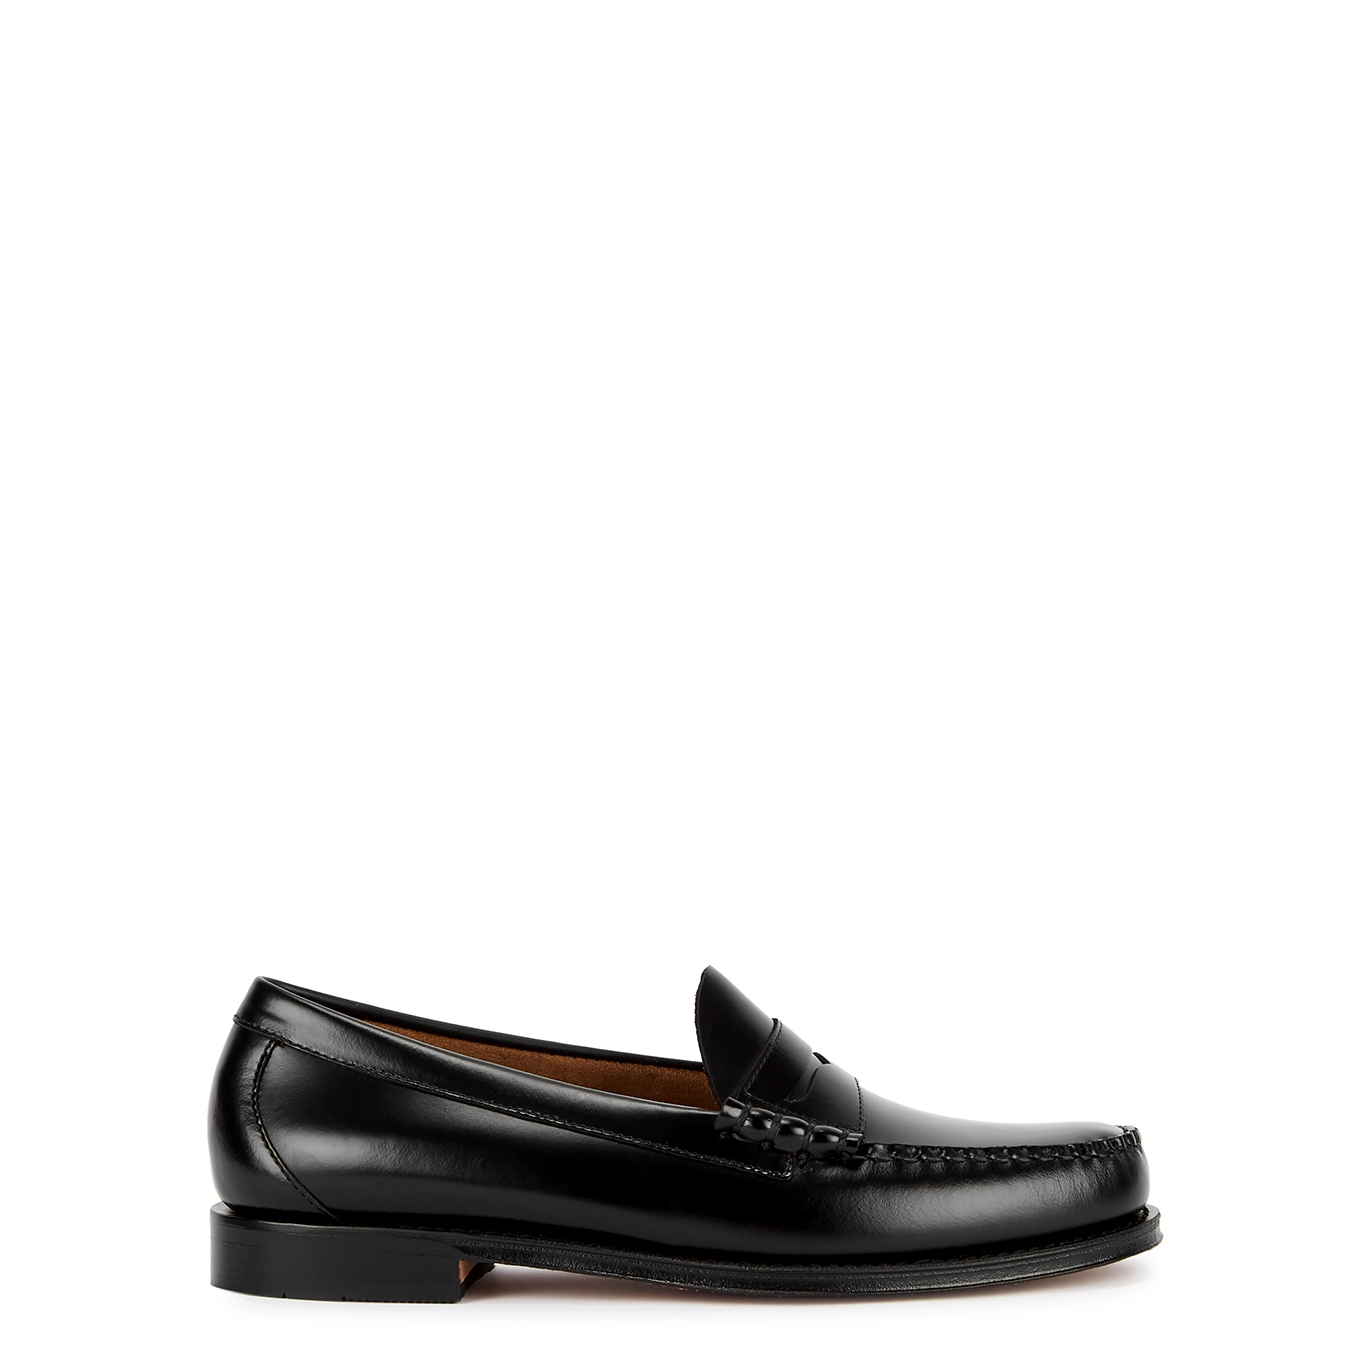 G.H Bass & Co Weejuns Heritage Larson Moc Black Leather Loafers - 6